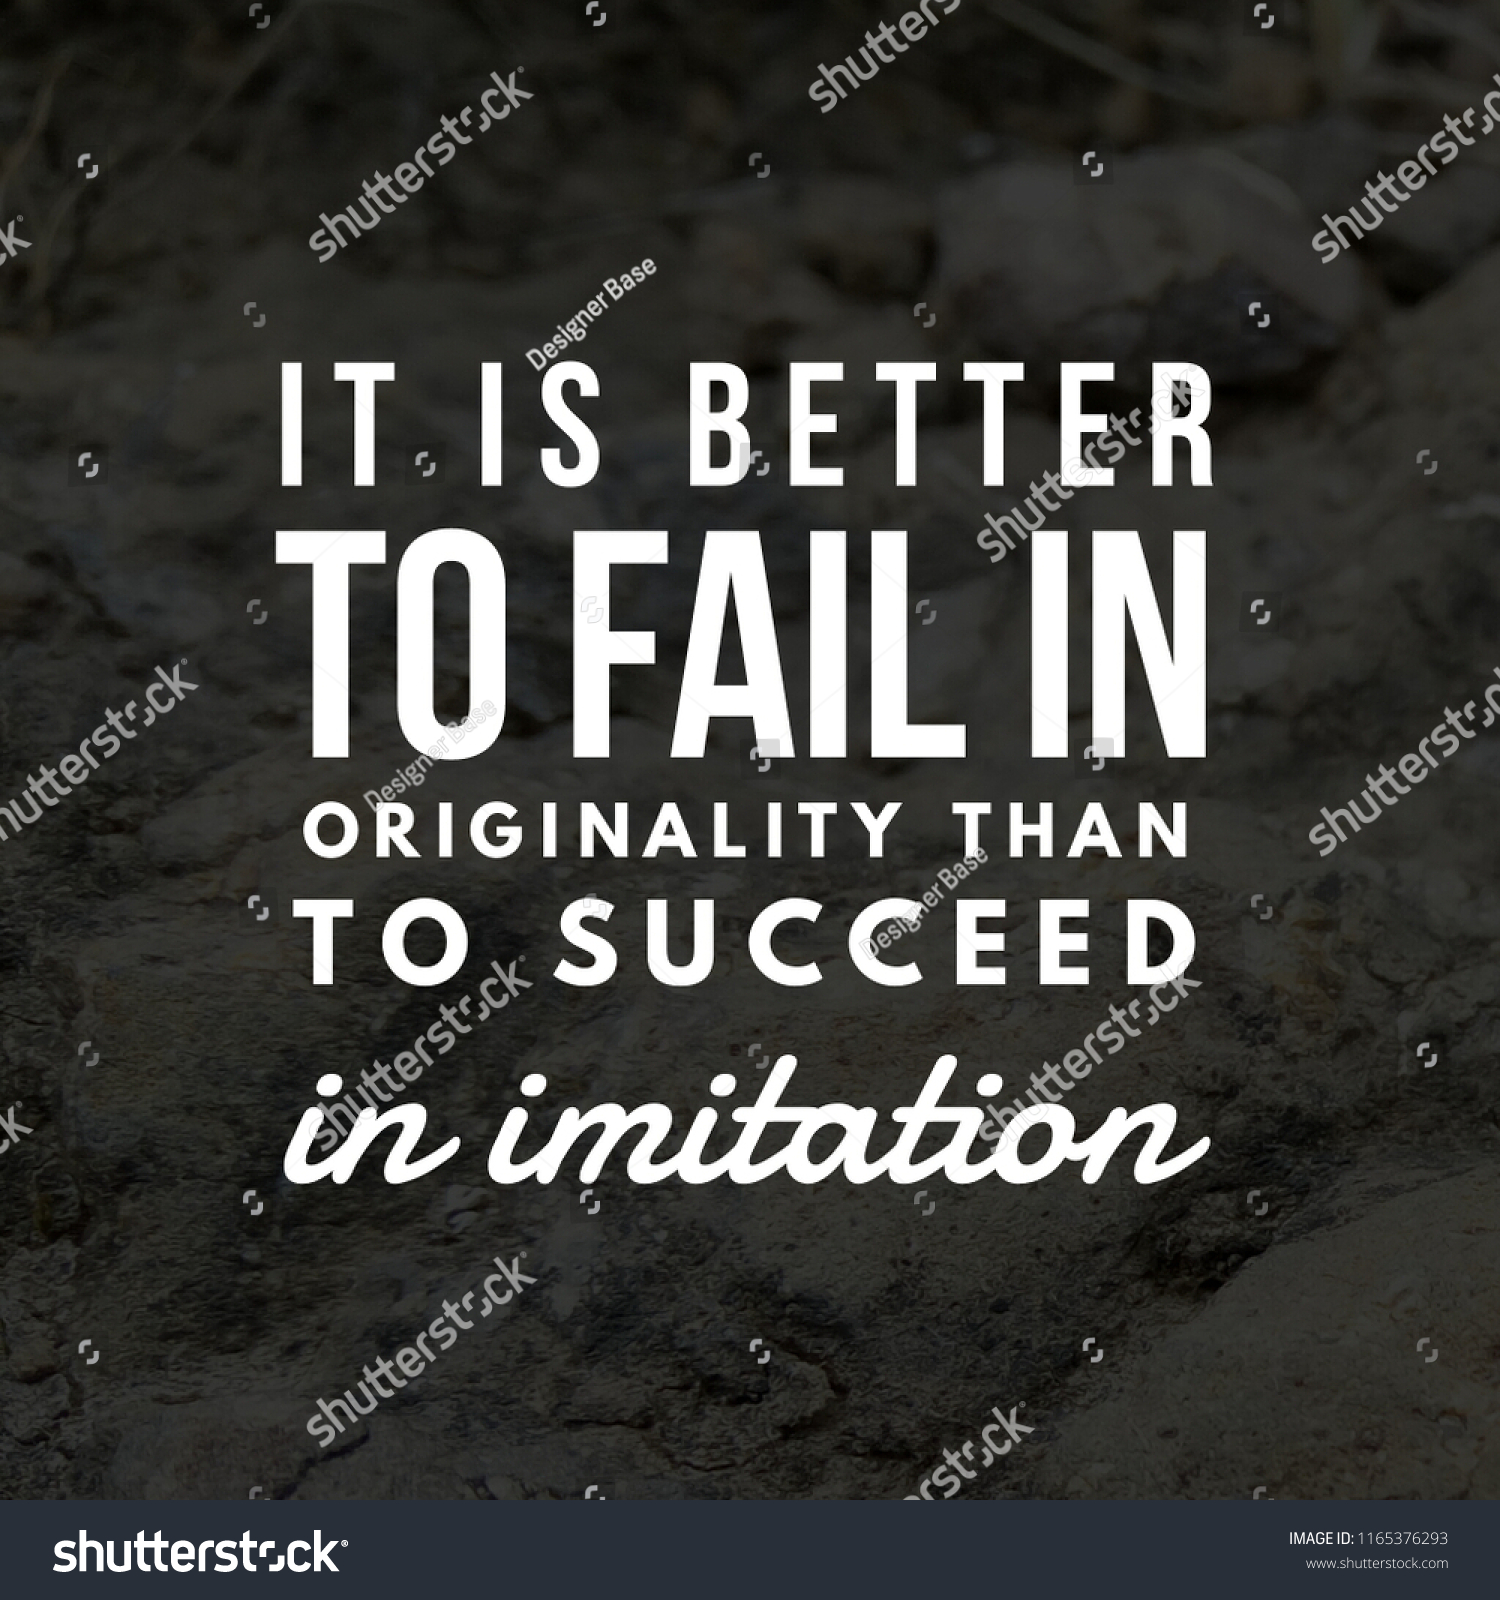 Motivational Quotes Life Stock Photo (Edit Now) 1165376293 - Shutterstock